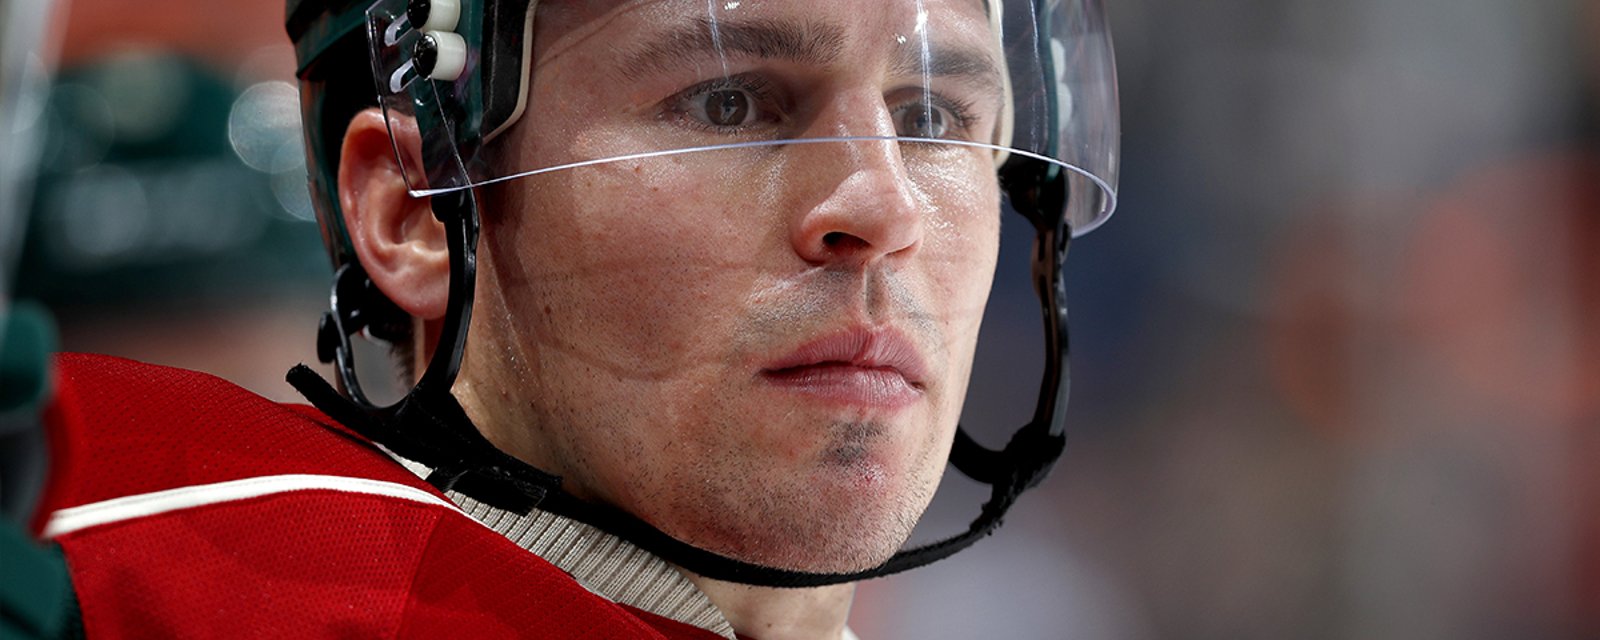 Breaking: Parise to undergo back surgery, out long-term